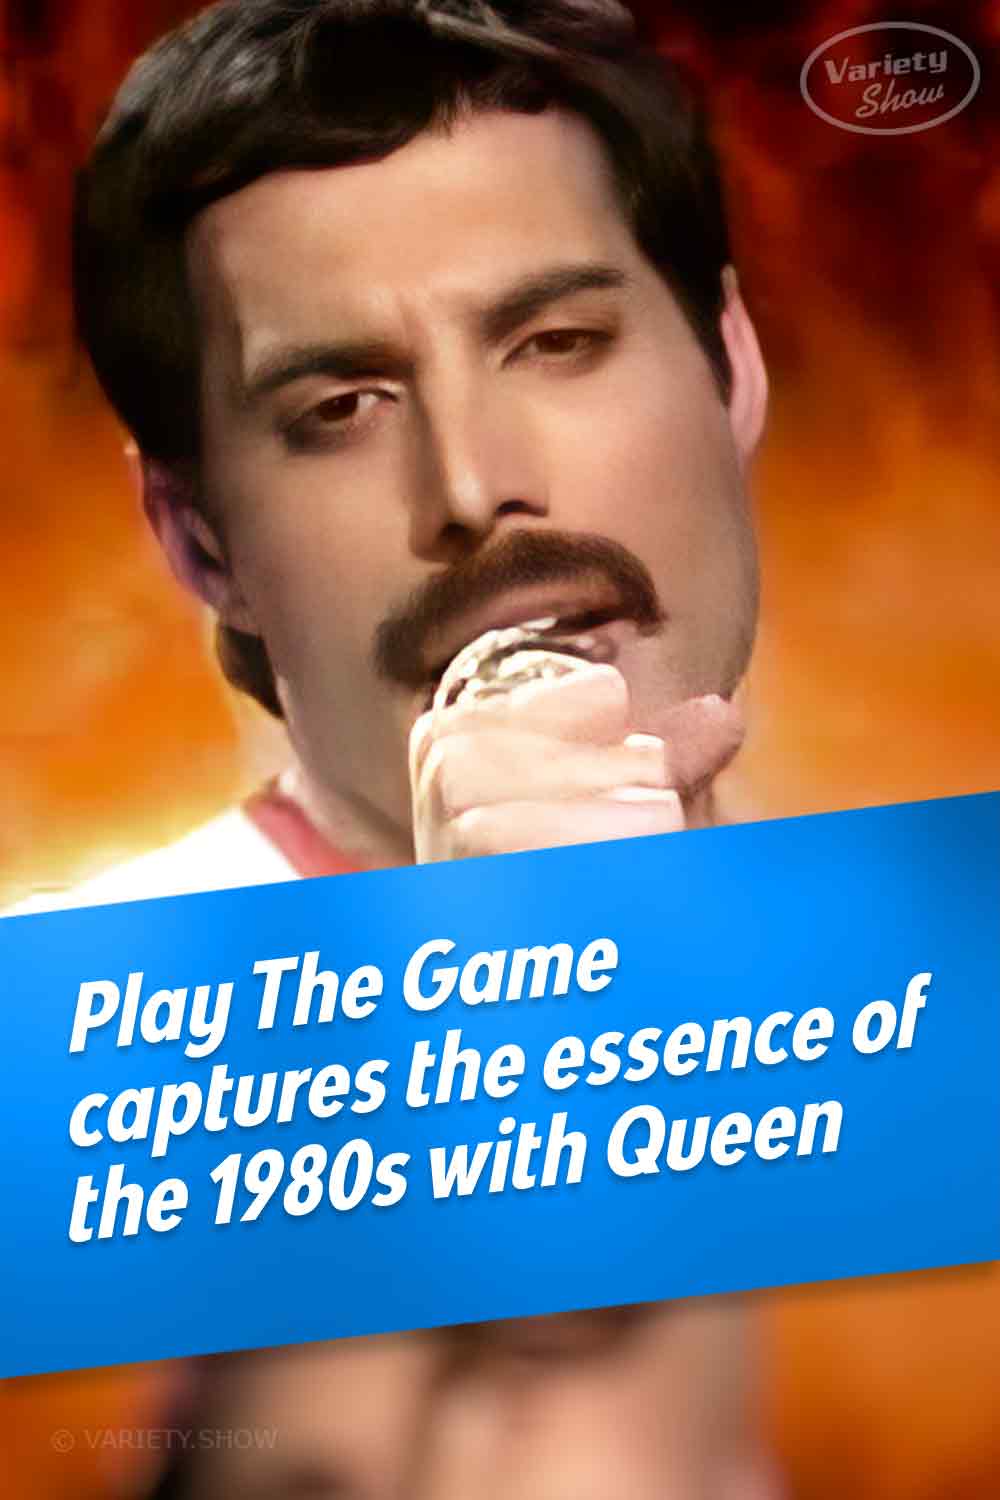 Play The Game captures the essence of the 1980s with Queen